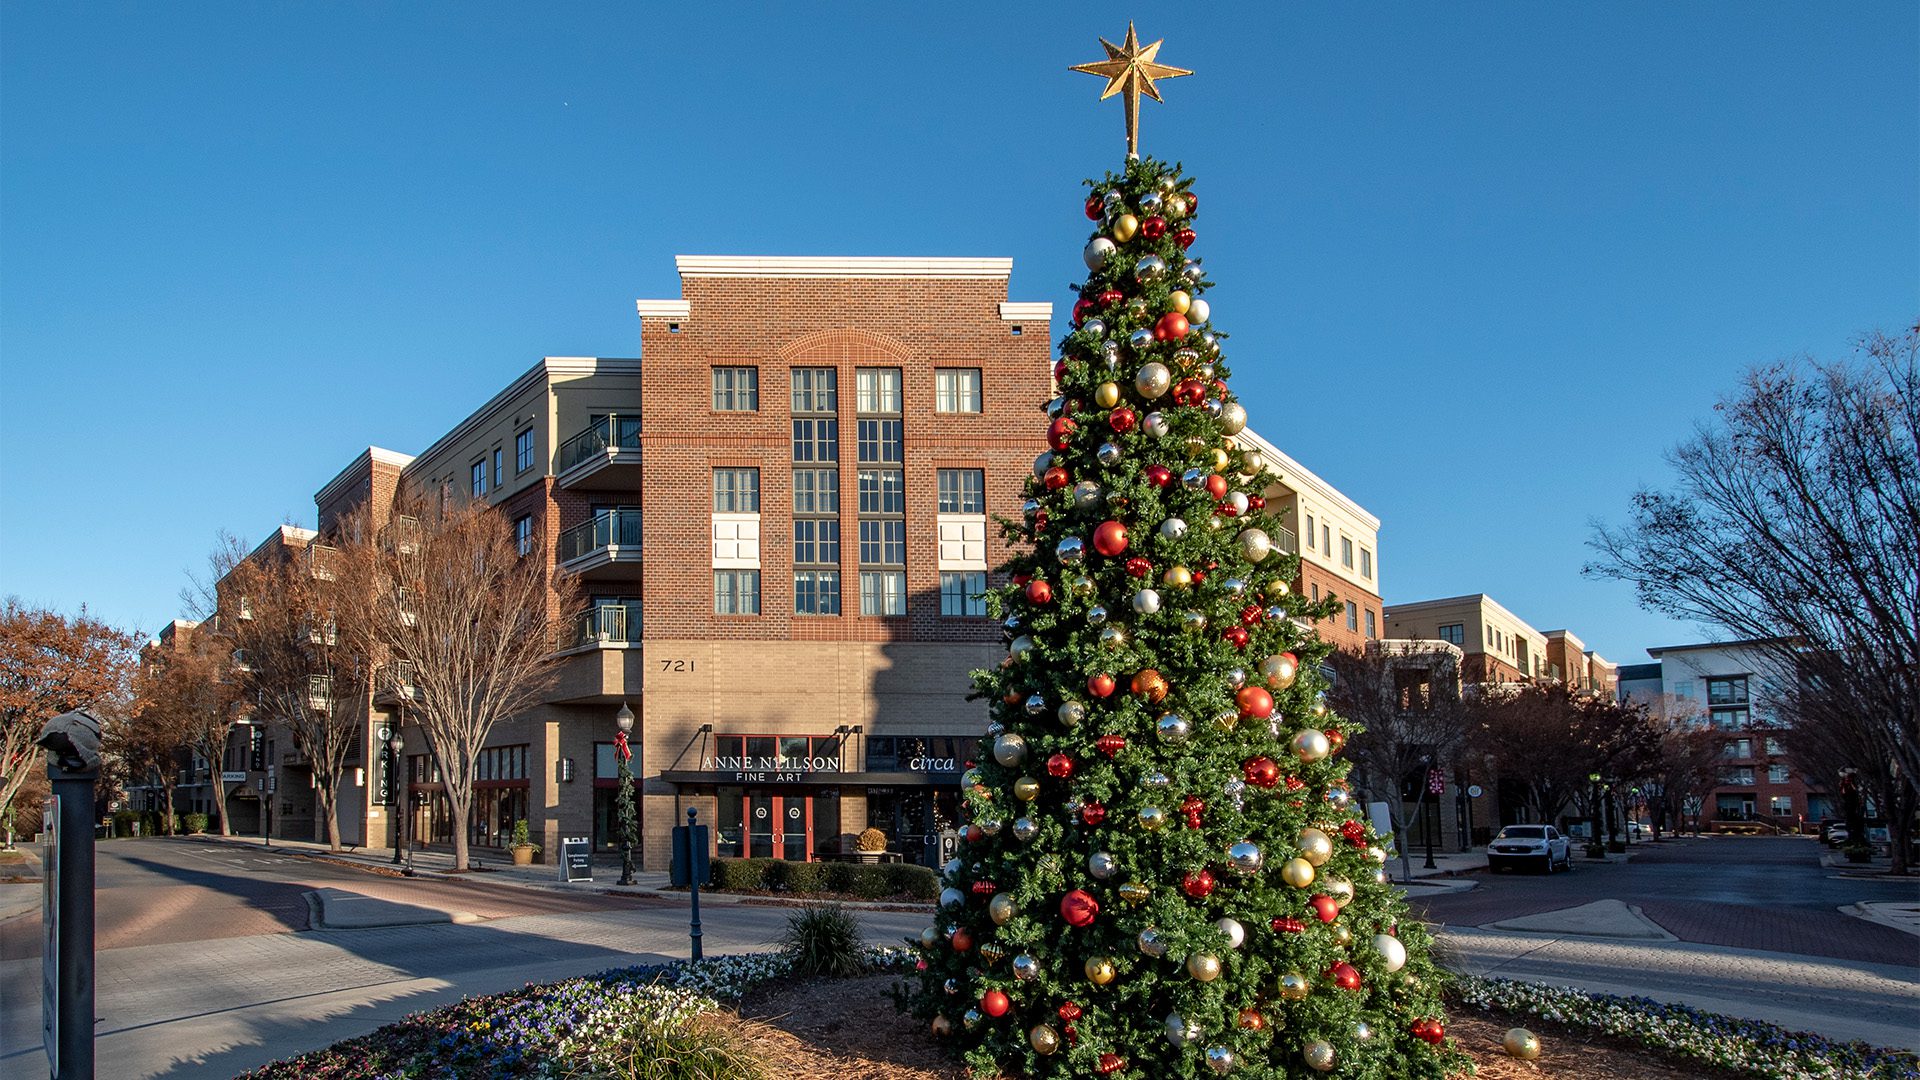 4-story brick building with retail on bottom and residential on top and a Christmas tree in foreground in the early morning